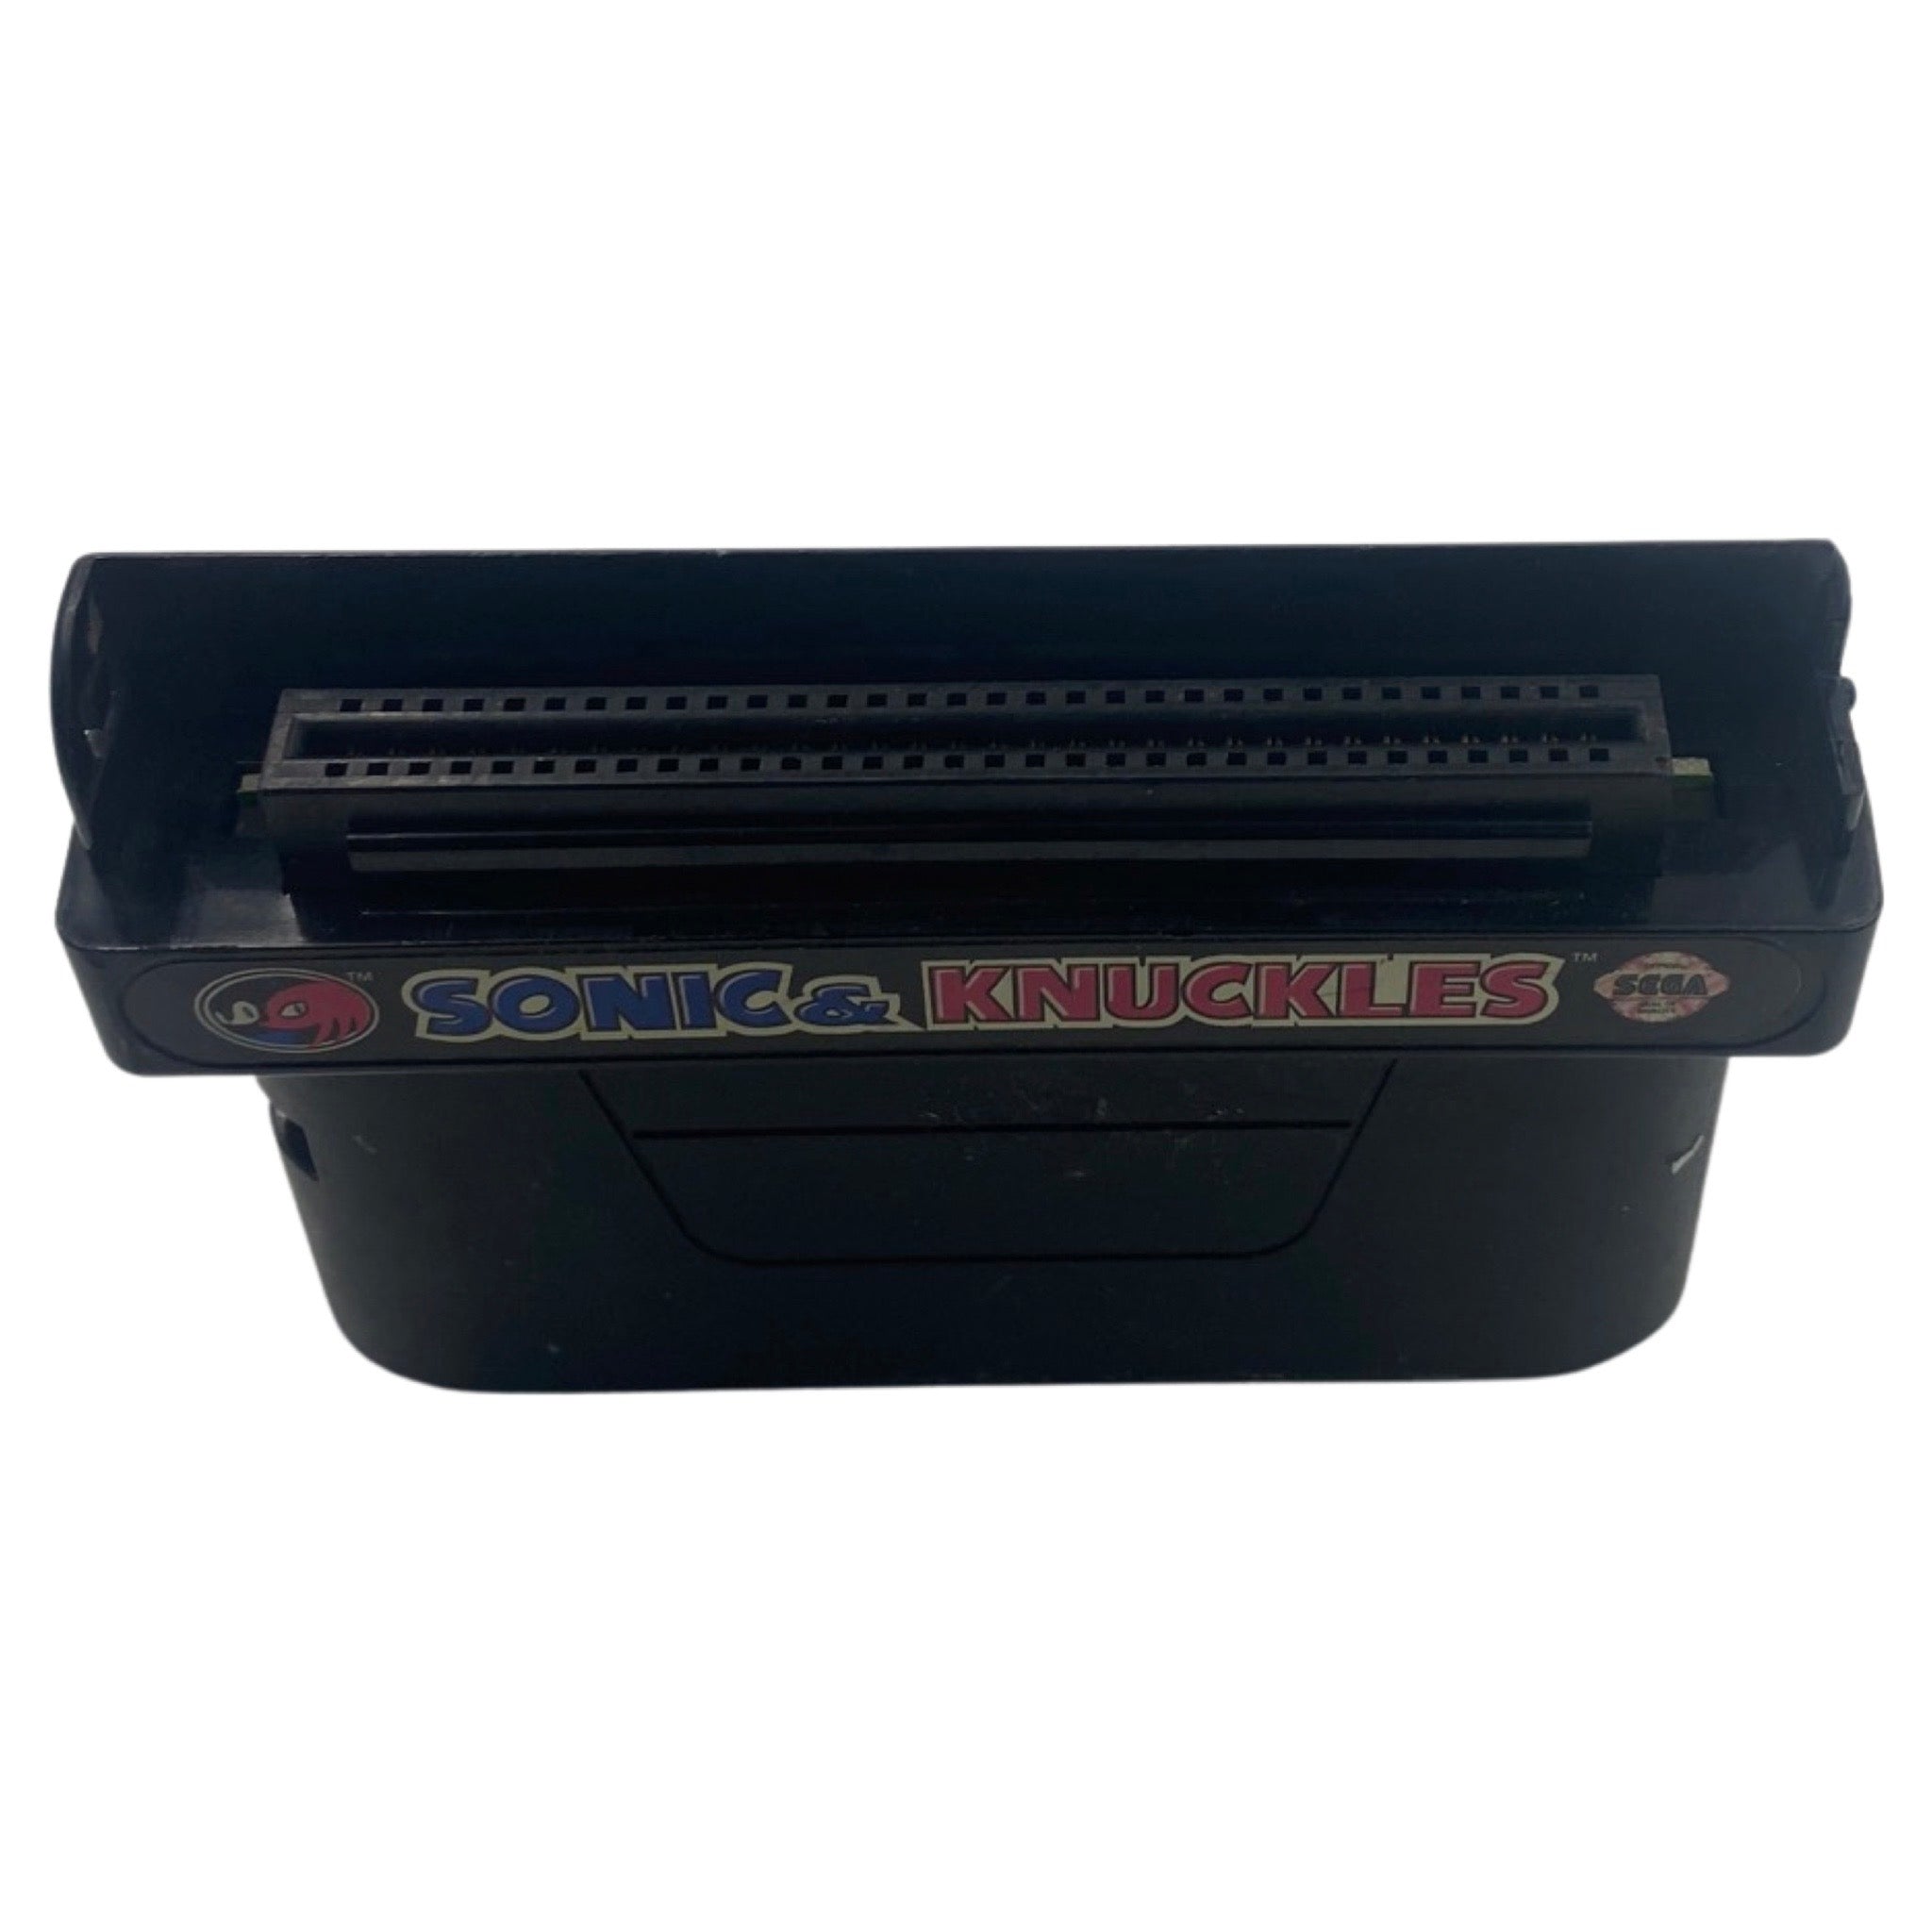 sonic and knuckles cartridge